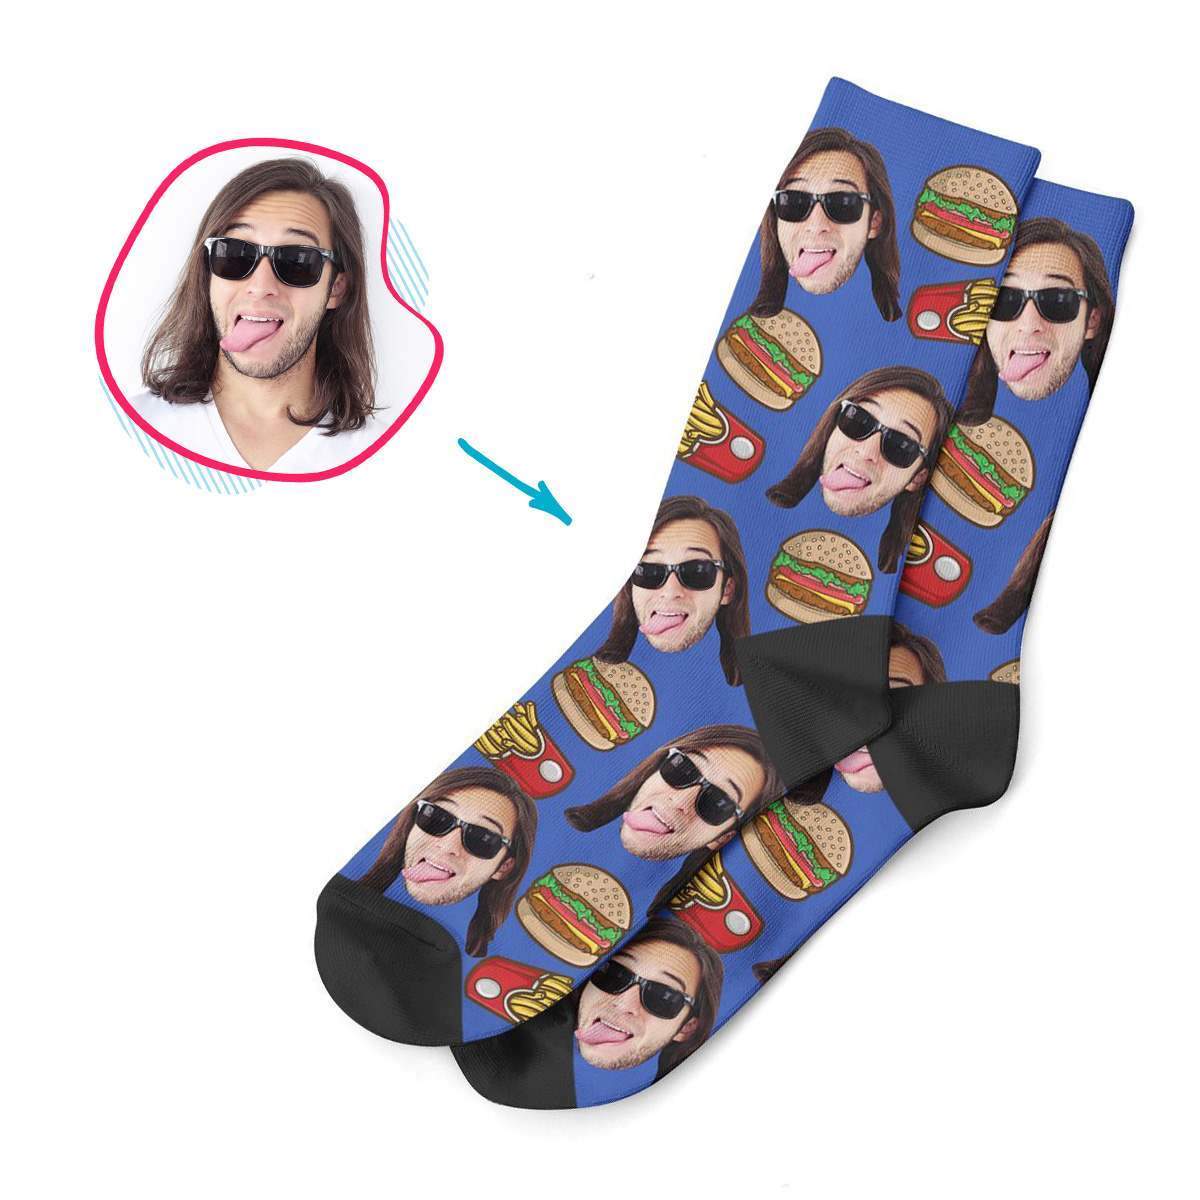 darkblue Fastfood socks personalized with photo of face printed on them